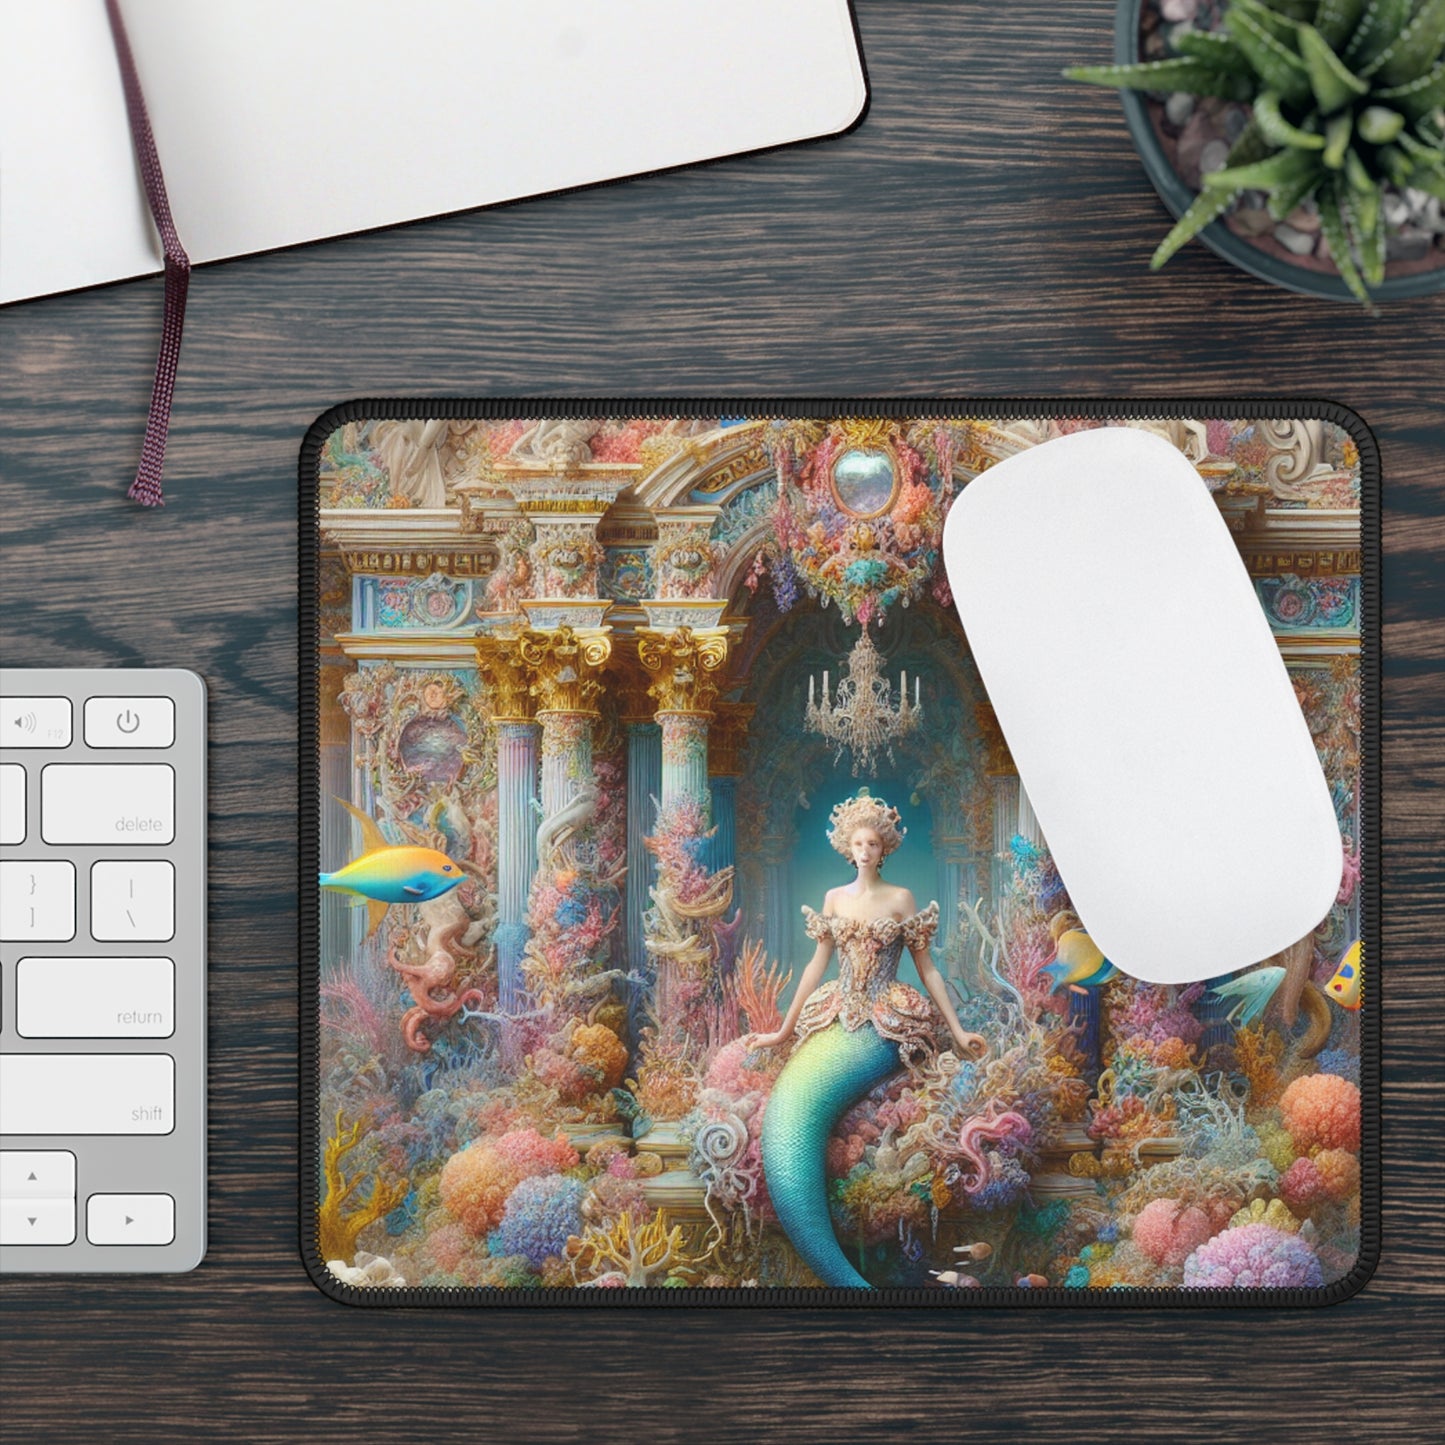 "Underwater Splendor: A Rococo Mermaid Palace" - The Alien Gaming Mouse Pad Rococo Style